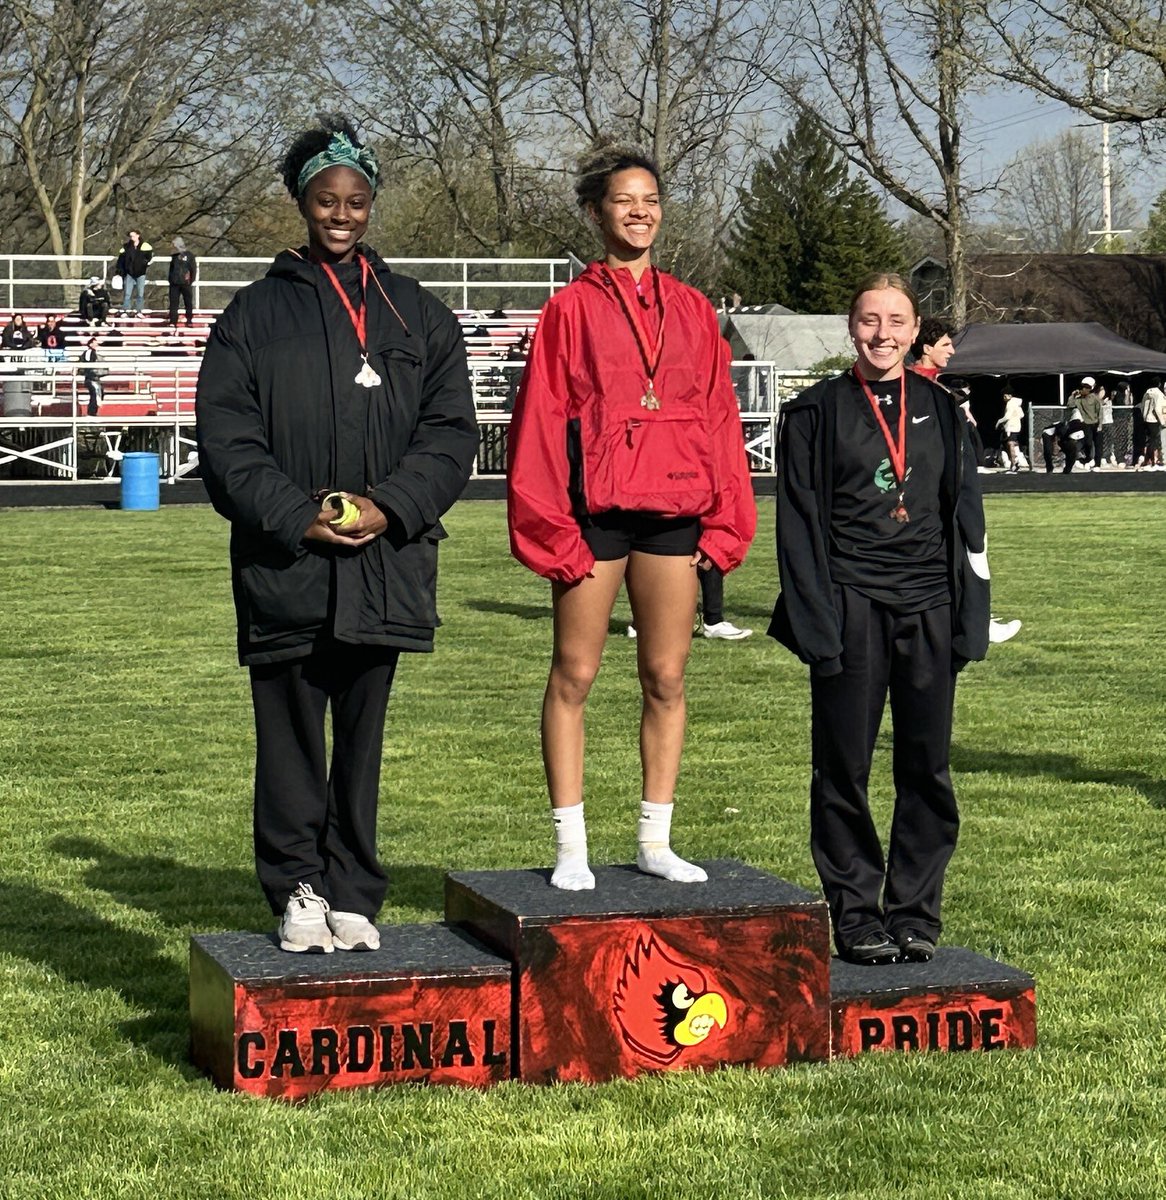 Congratulations to Audrey Goebel who took 3rd in the long jump at the Brookside Invitational!
#onceaRaider